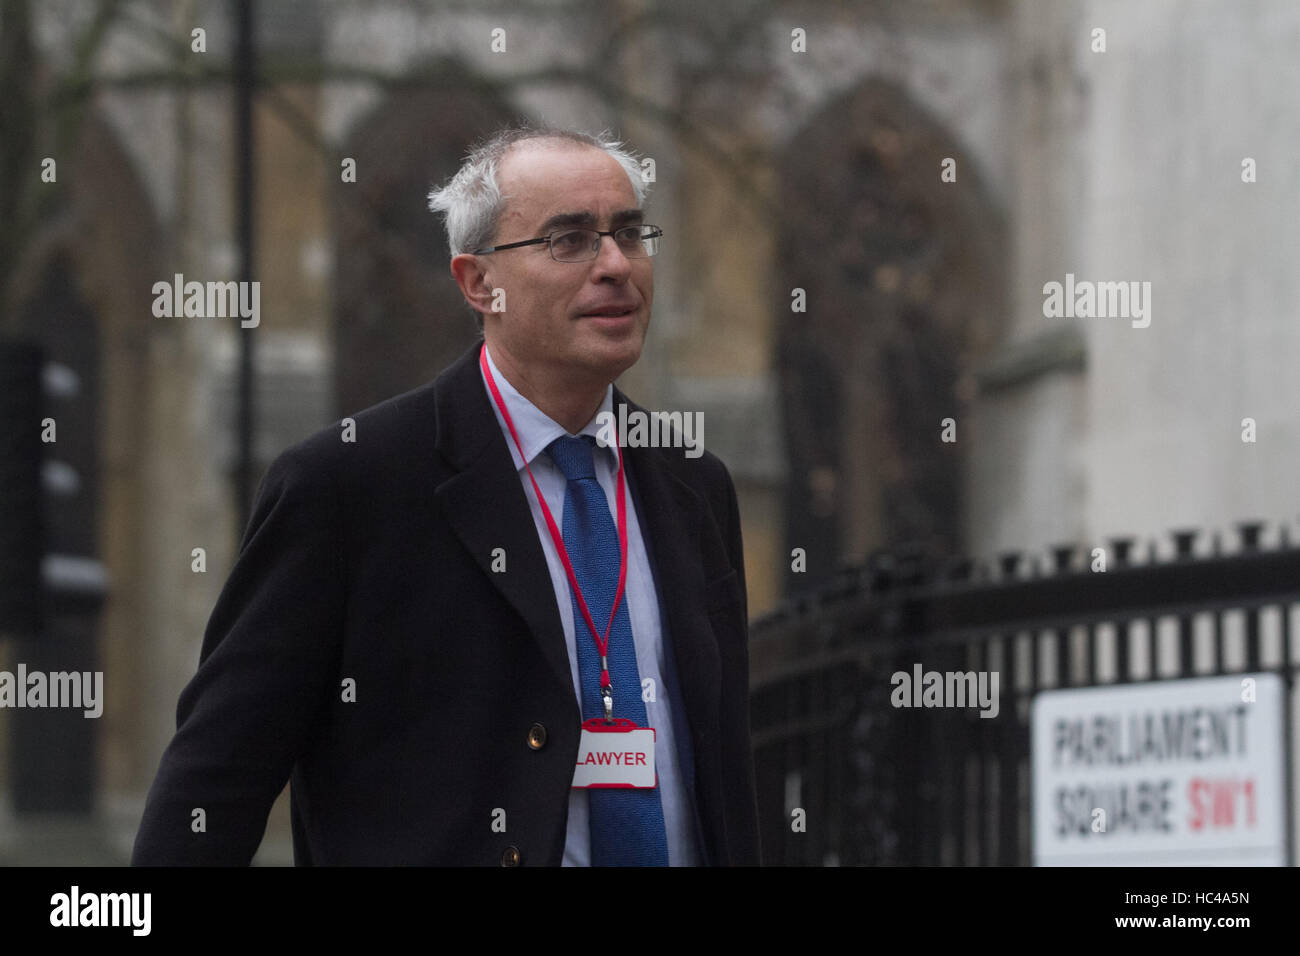 London UK. 8th December 2016. Lord Pannick QC for Gina Miller arrives at the Supreme Court on the final day of deliberations as the government seeks to overturn the High Court ruling  on whether parliament should debate Article 50 to allow Britain to leave the European Union. Gina Miller is the lead claimant who won the case at the High Court in November in the legal fight to get Parliament to vote on whether the UK can start the process of leaving the EU. Credit:  amer ghazzal/Alamy Live News Stock Photo